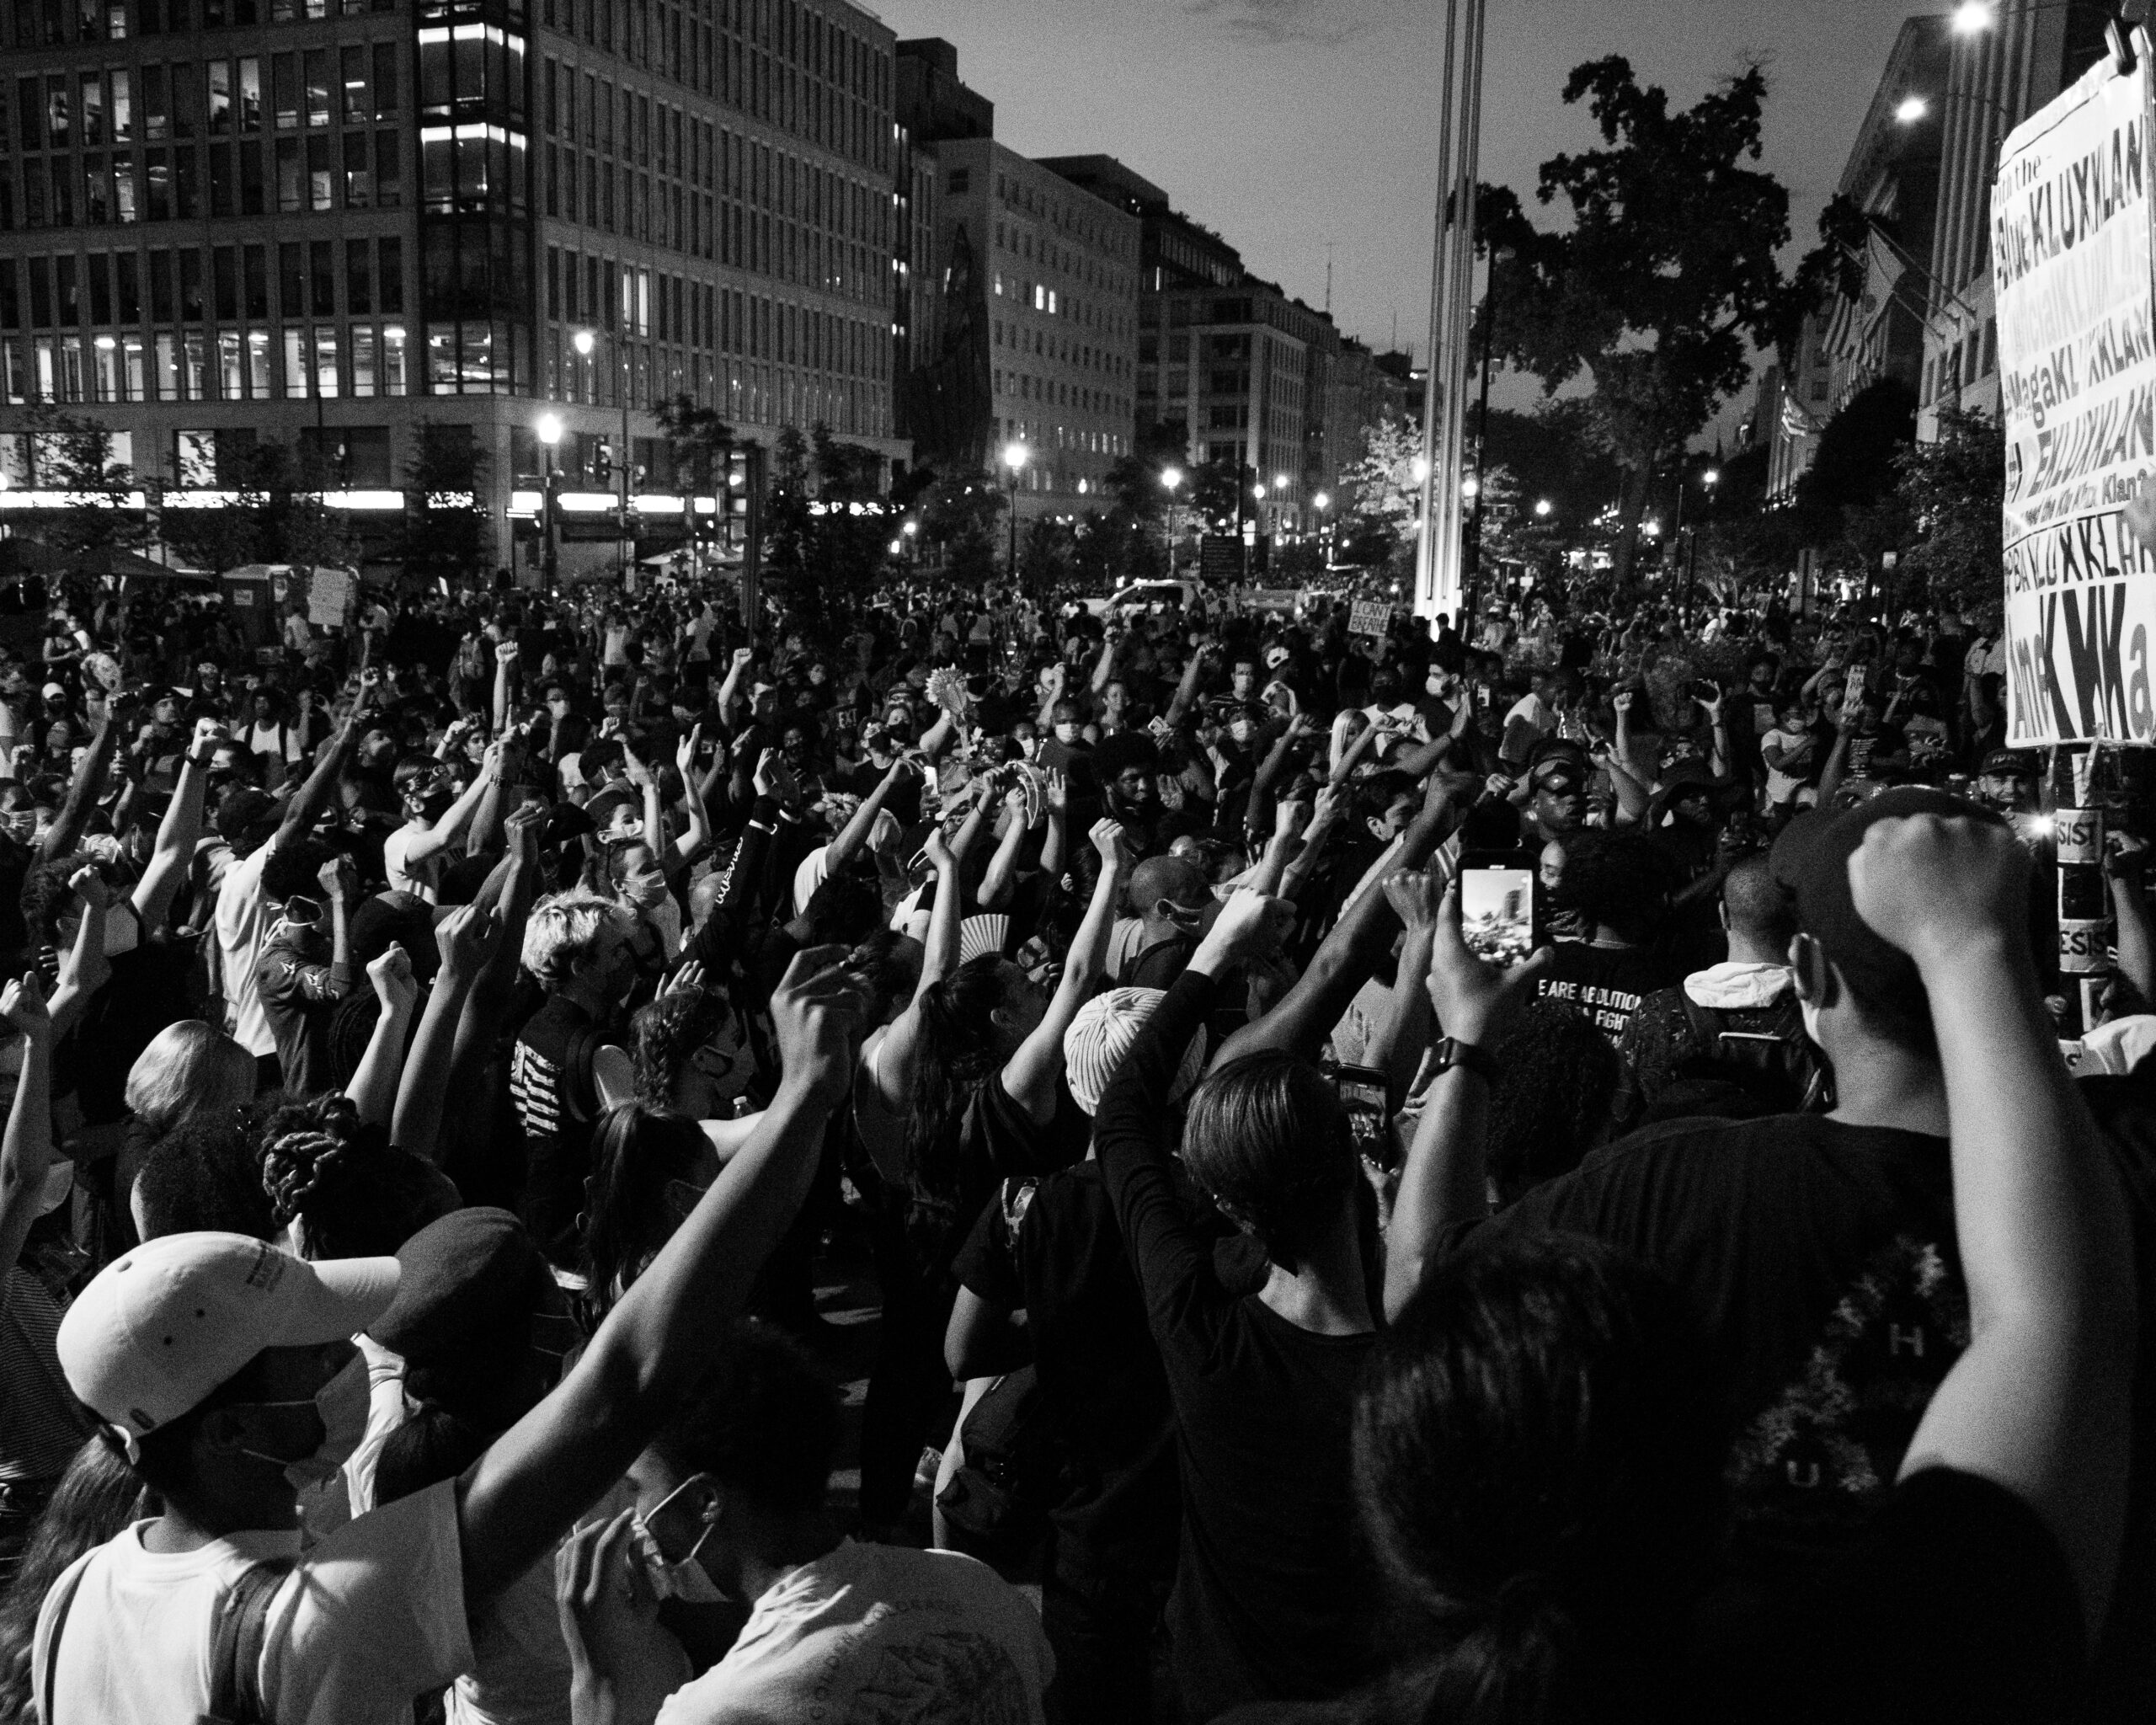 Black and white street scene of protest with people with fists raised.